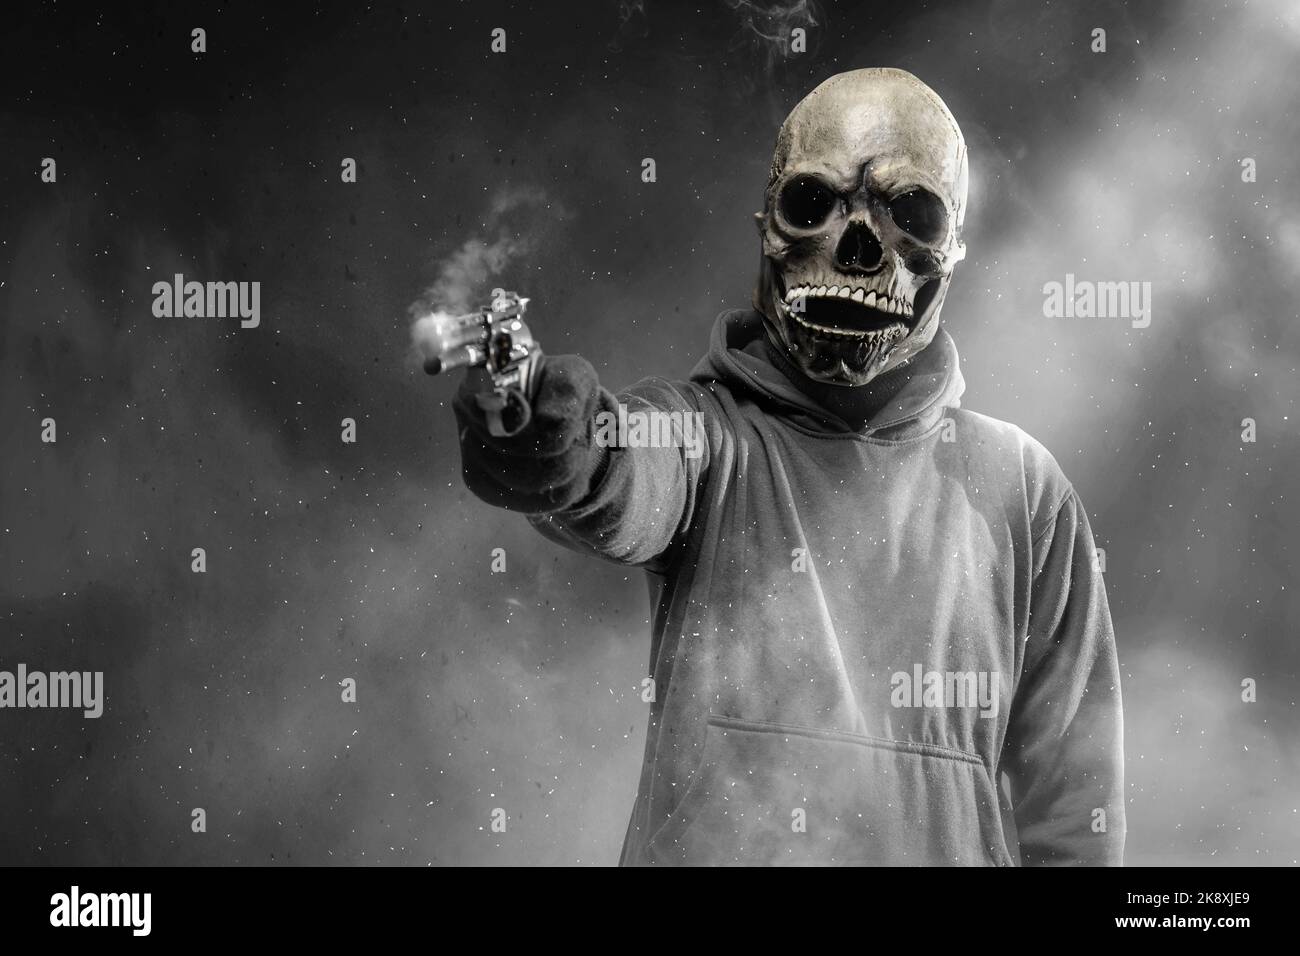 Man with a skull head costume holding gun and standing in the dark. Halloween concept Stock Photo